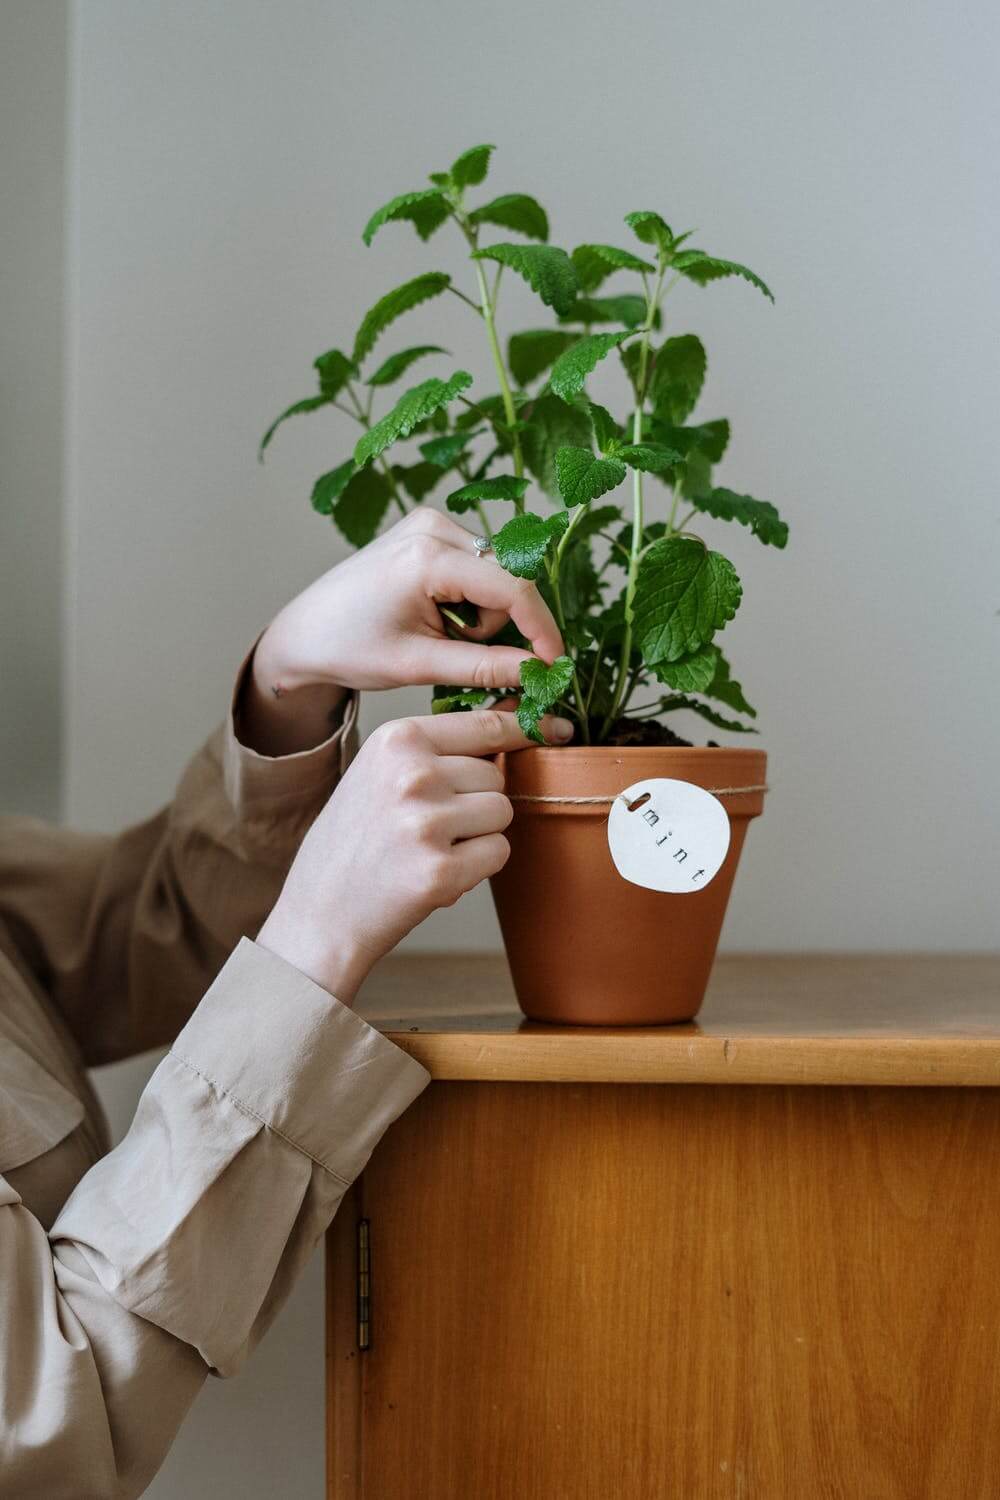 Hands touching at mint growing in a pot